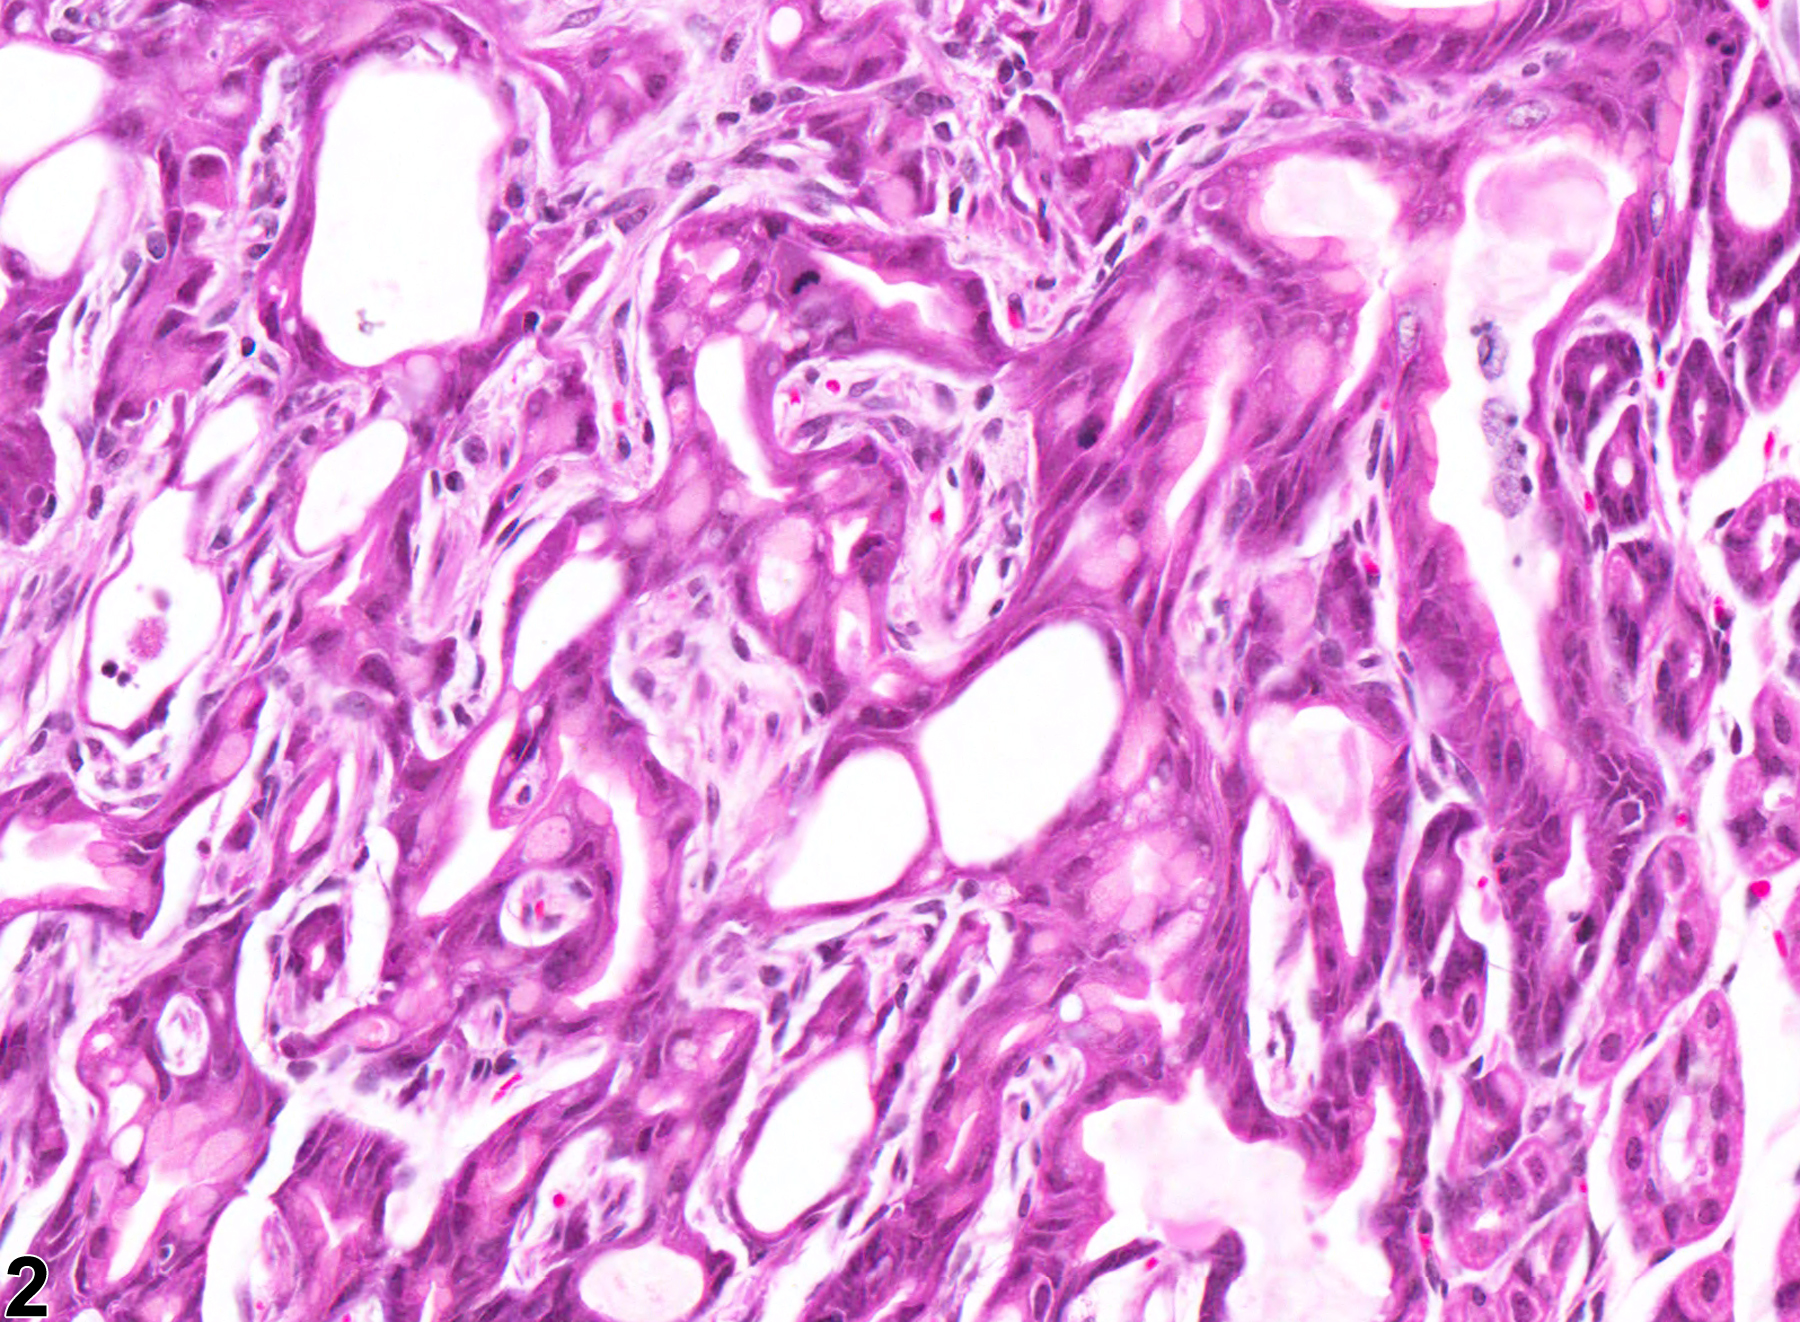 Image of hyperplasia, atypical in the glandular stomach epithelium from a female B6C3F1 mouse in a chronic study